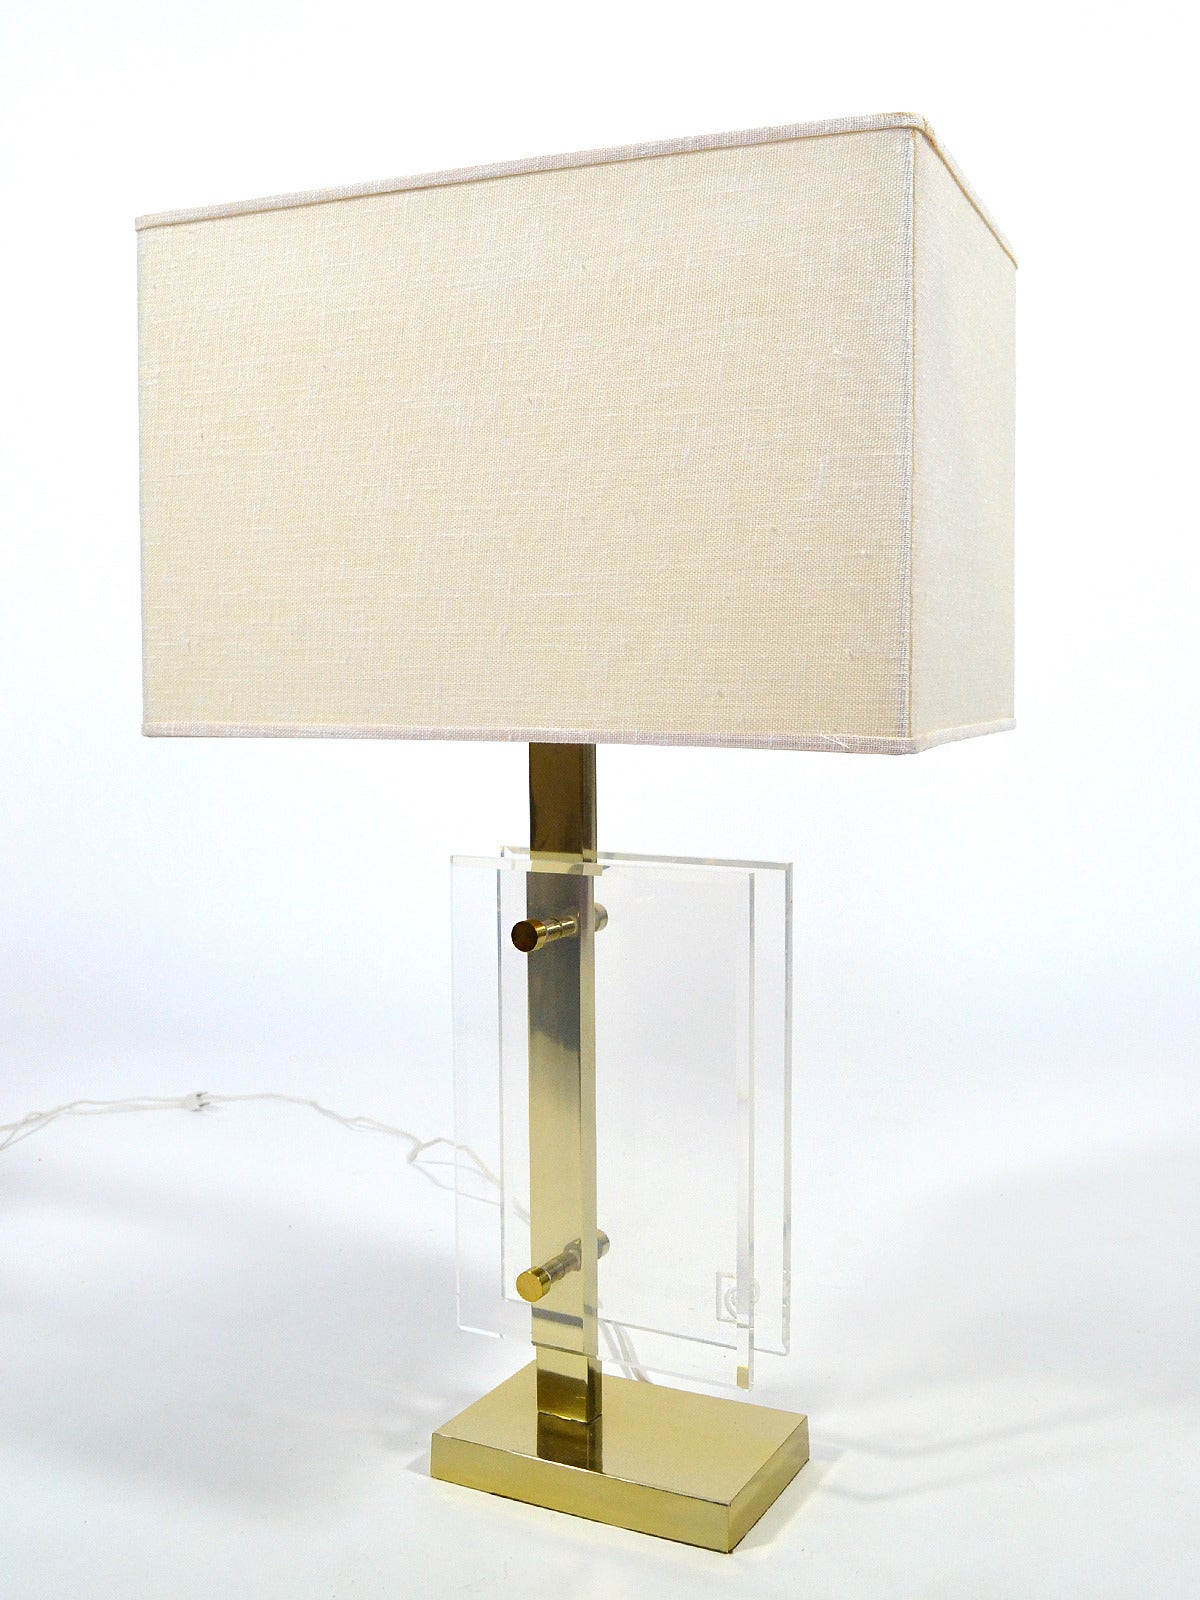 American Pierre Cardin Table Lamp in Brass and Lucite